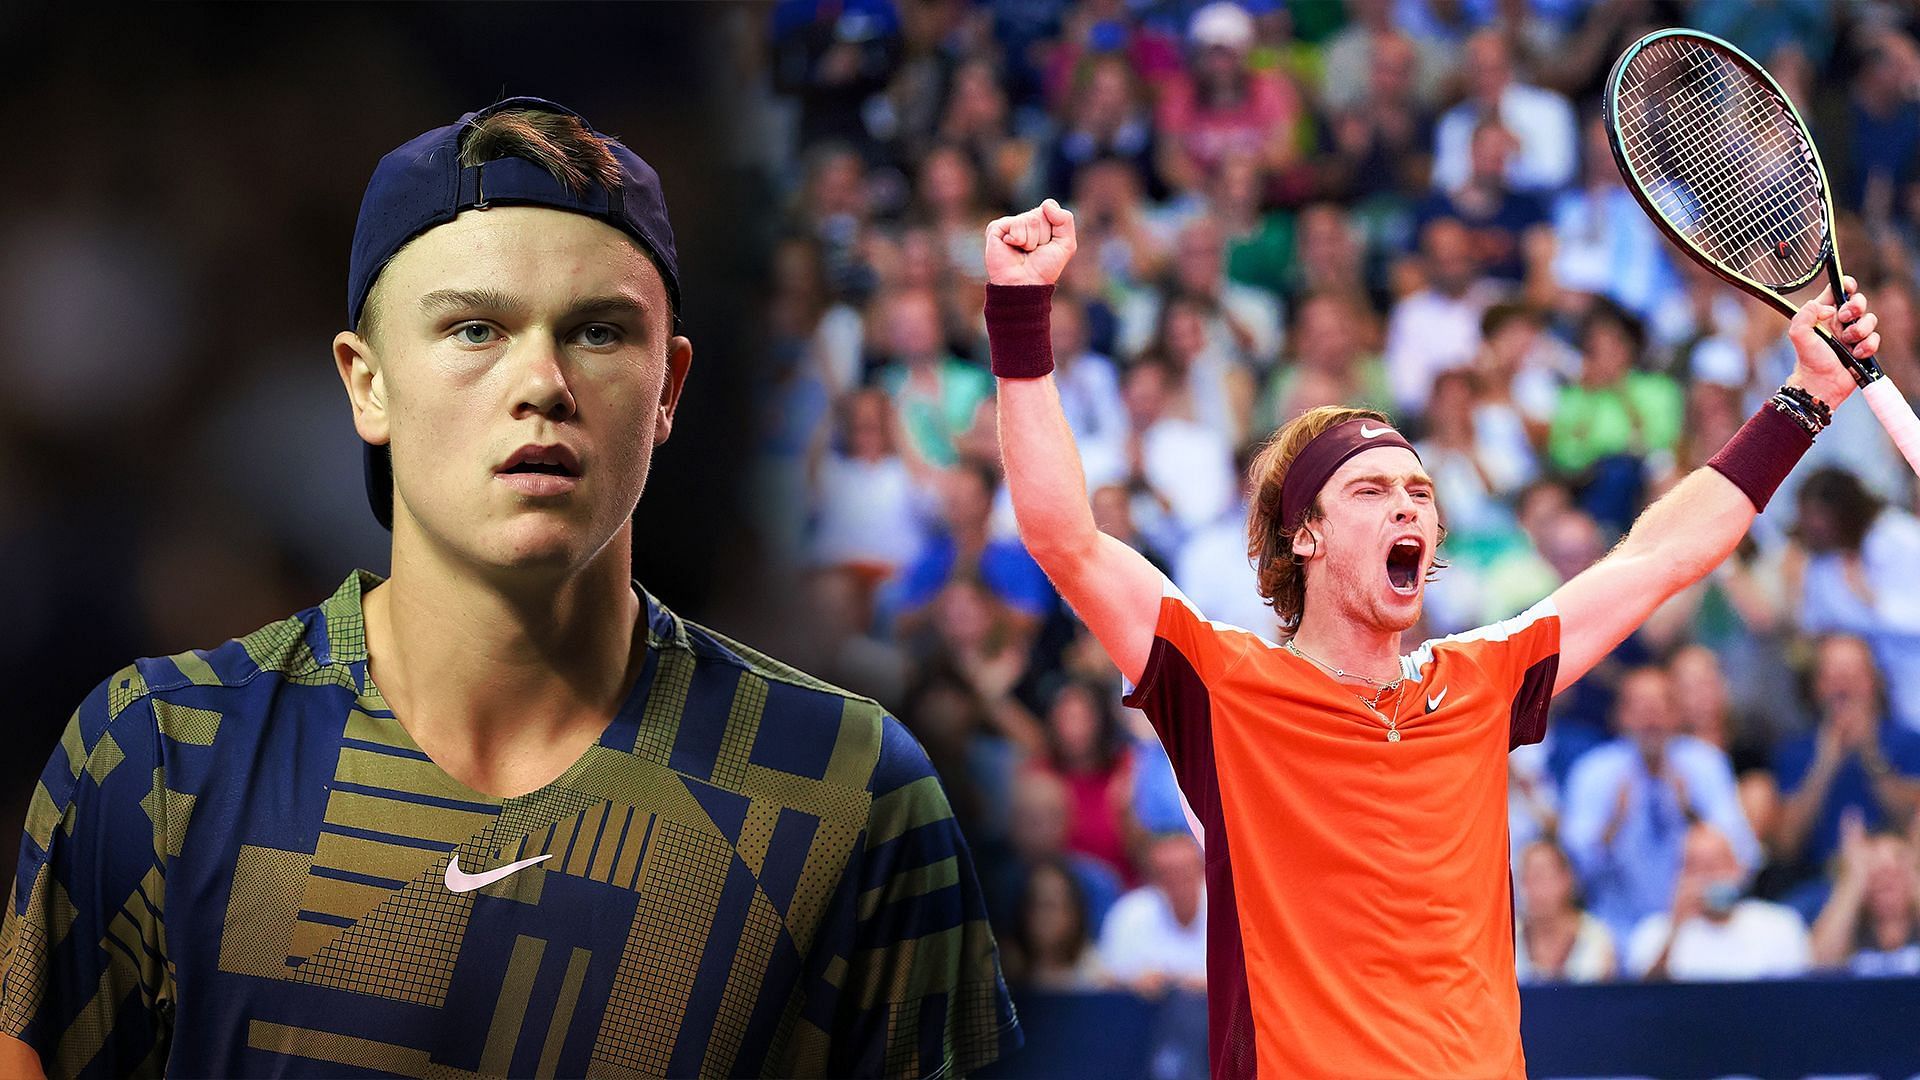 Holger Rune (left) sent off Andrey Rublev (right) in the third round of the Paris Masters before revealing that the World No. 9 is his idol.